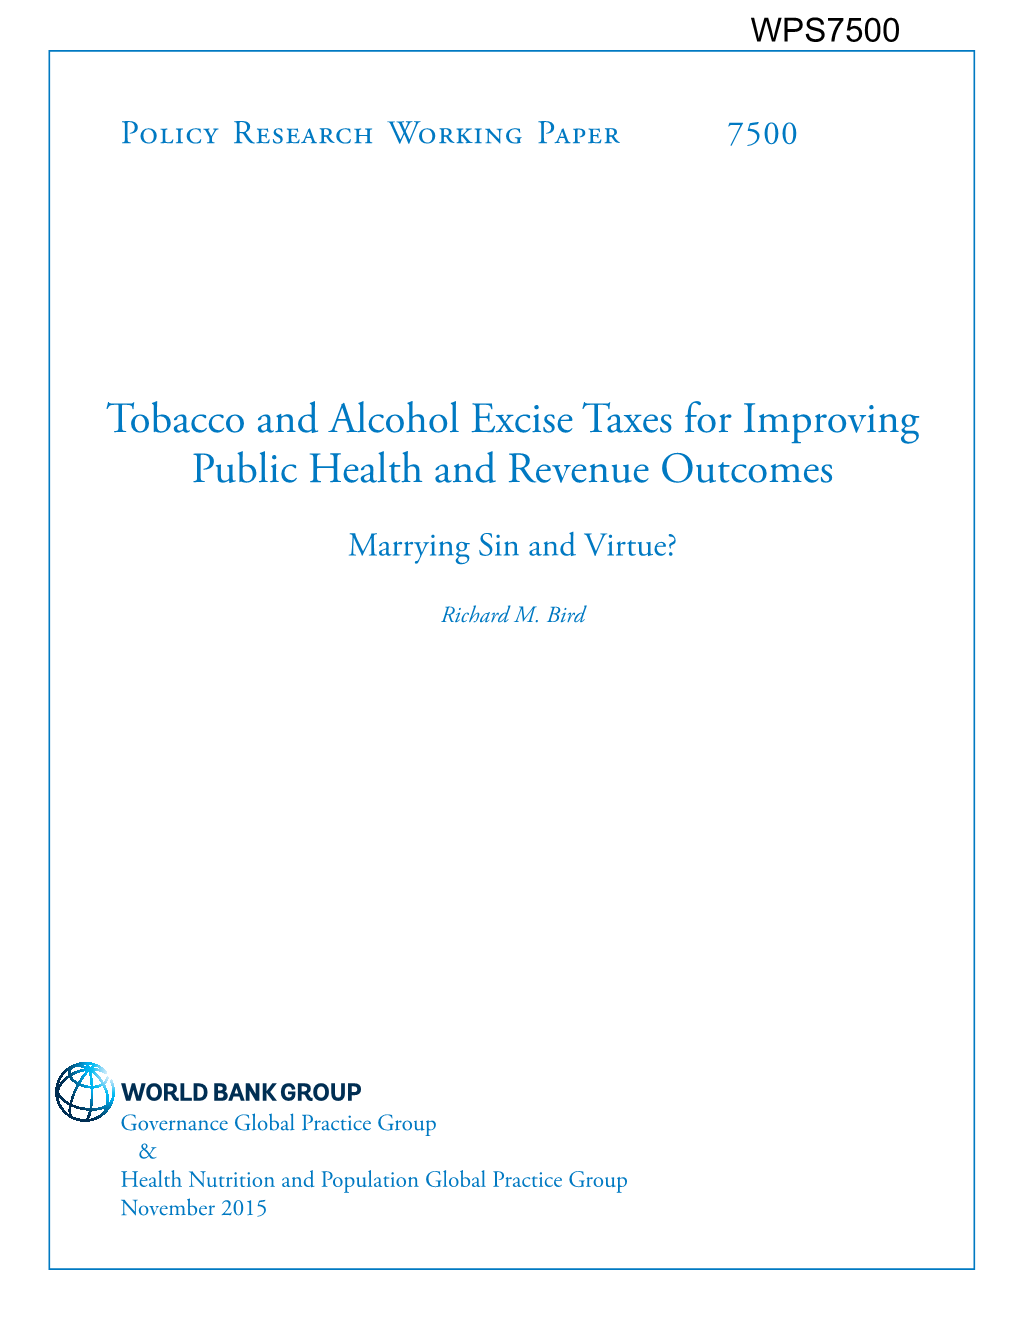 Tobacco and Alcohol Excise Taxes for Improving Public Health and Revenue Outcomes